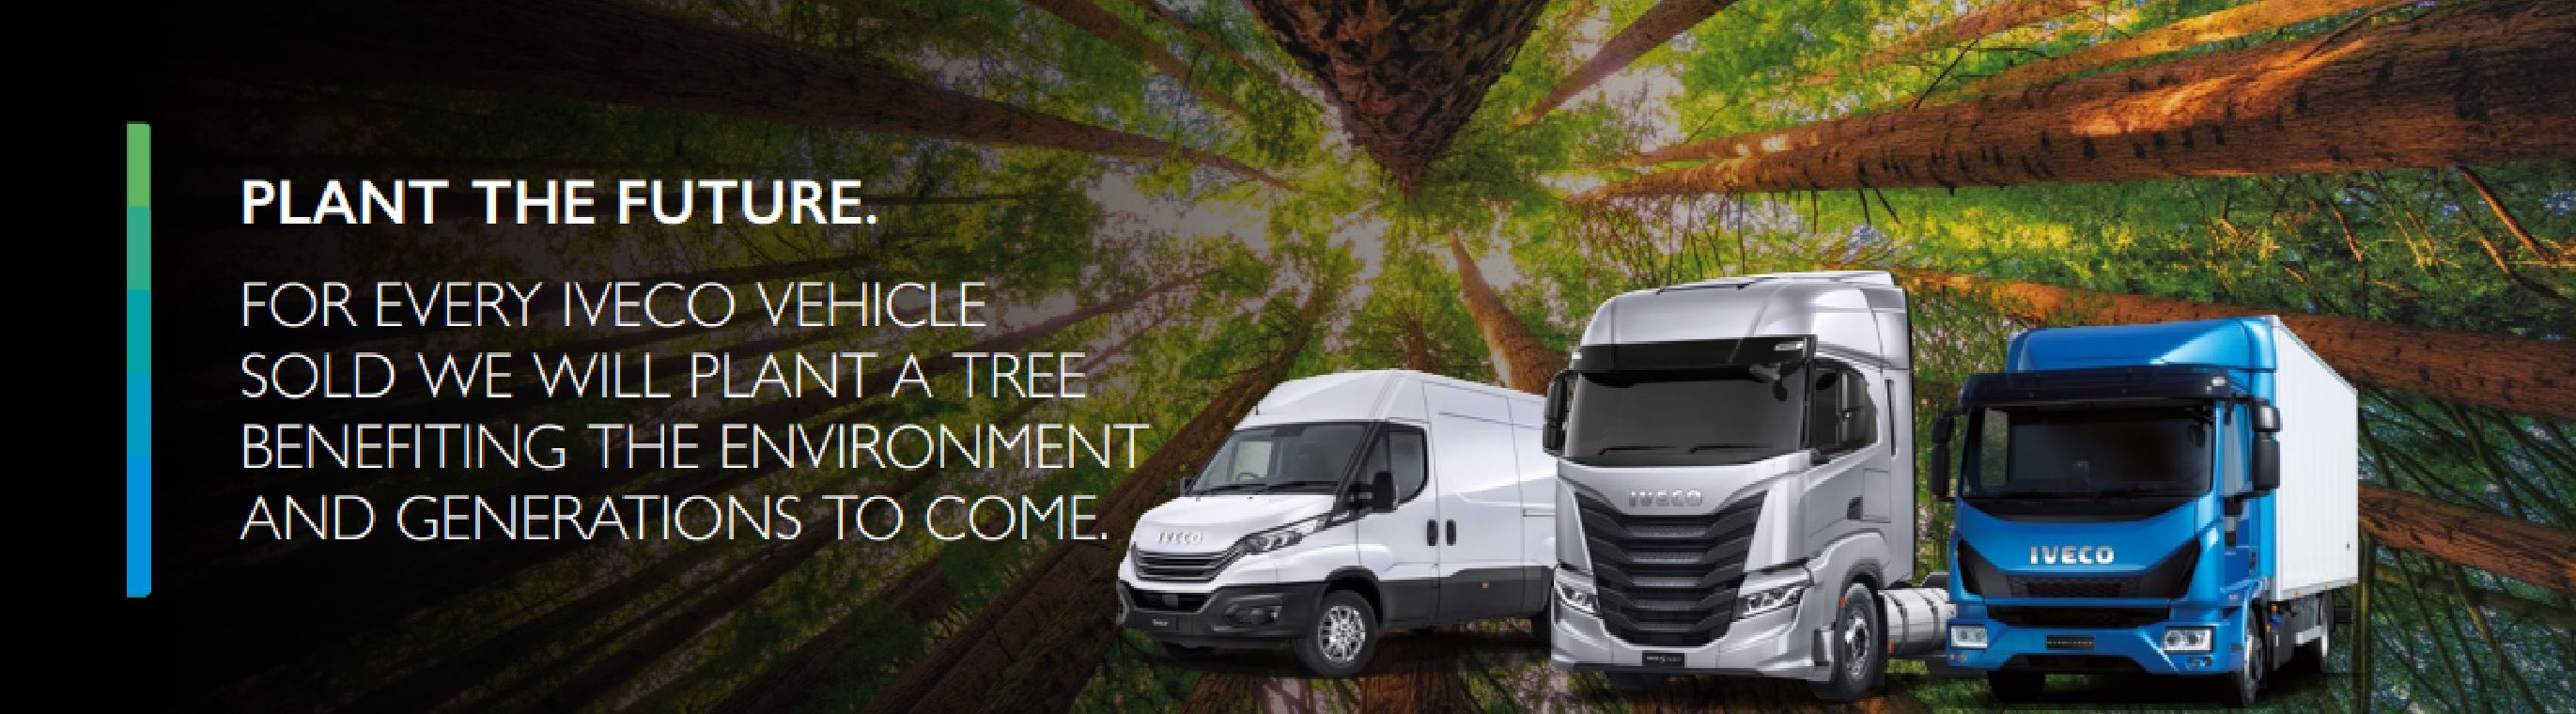 PLANT A TREE South West Truck & Van